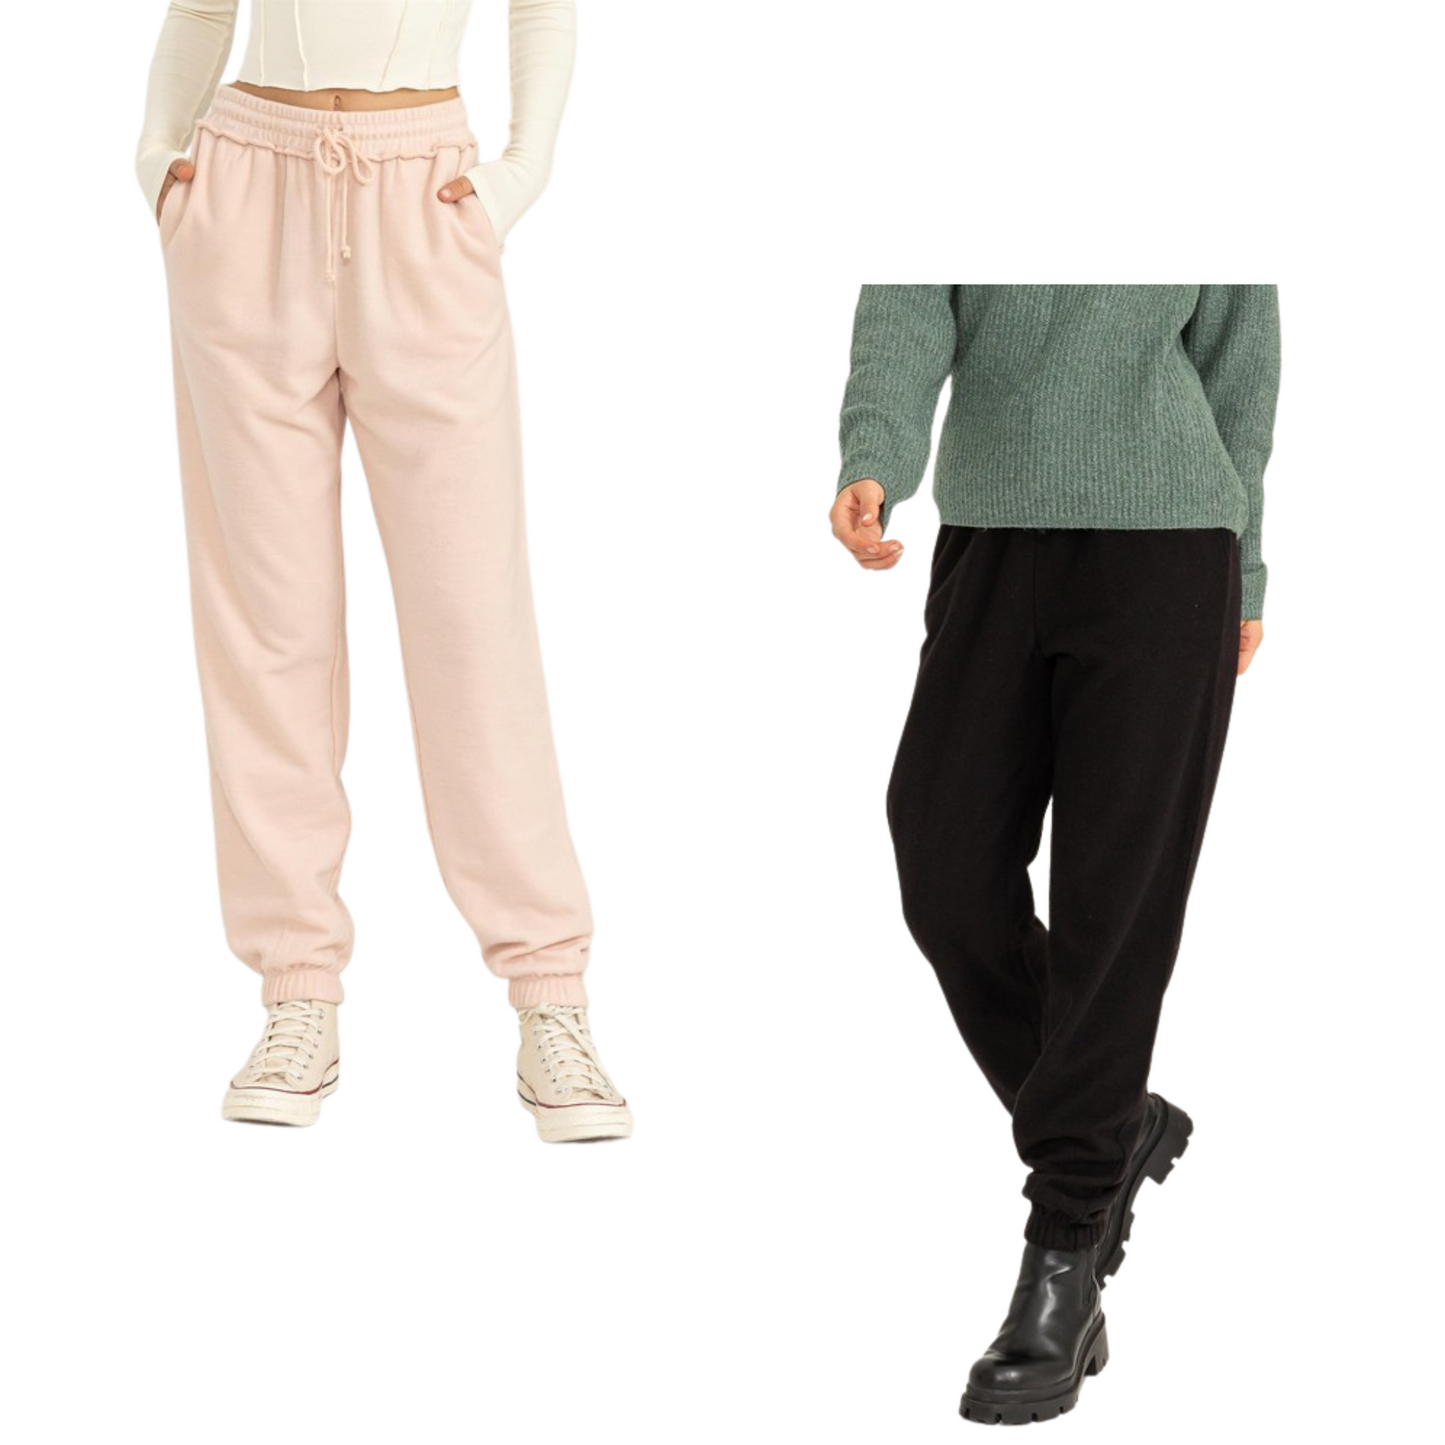 Our High Waisted Joggers provide a comfortable fit with a high, adjustable drawstring waist and relaxed legs with elastic cinching hems. Enhance your style with the unique reverse seam detailing and choose between black and duty pink.